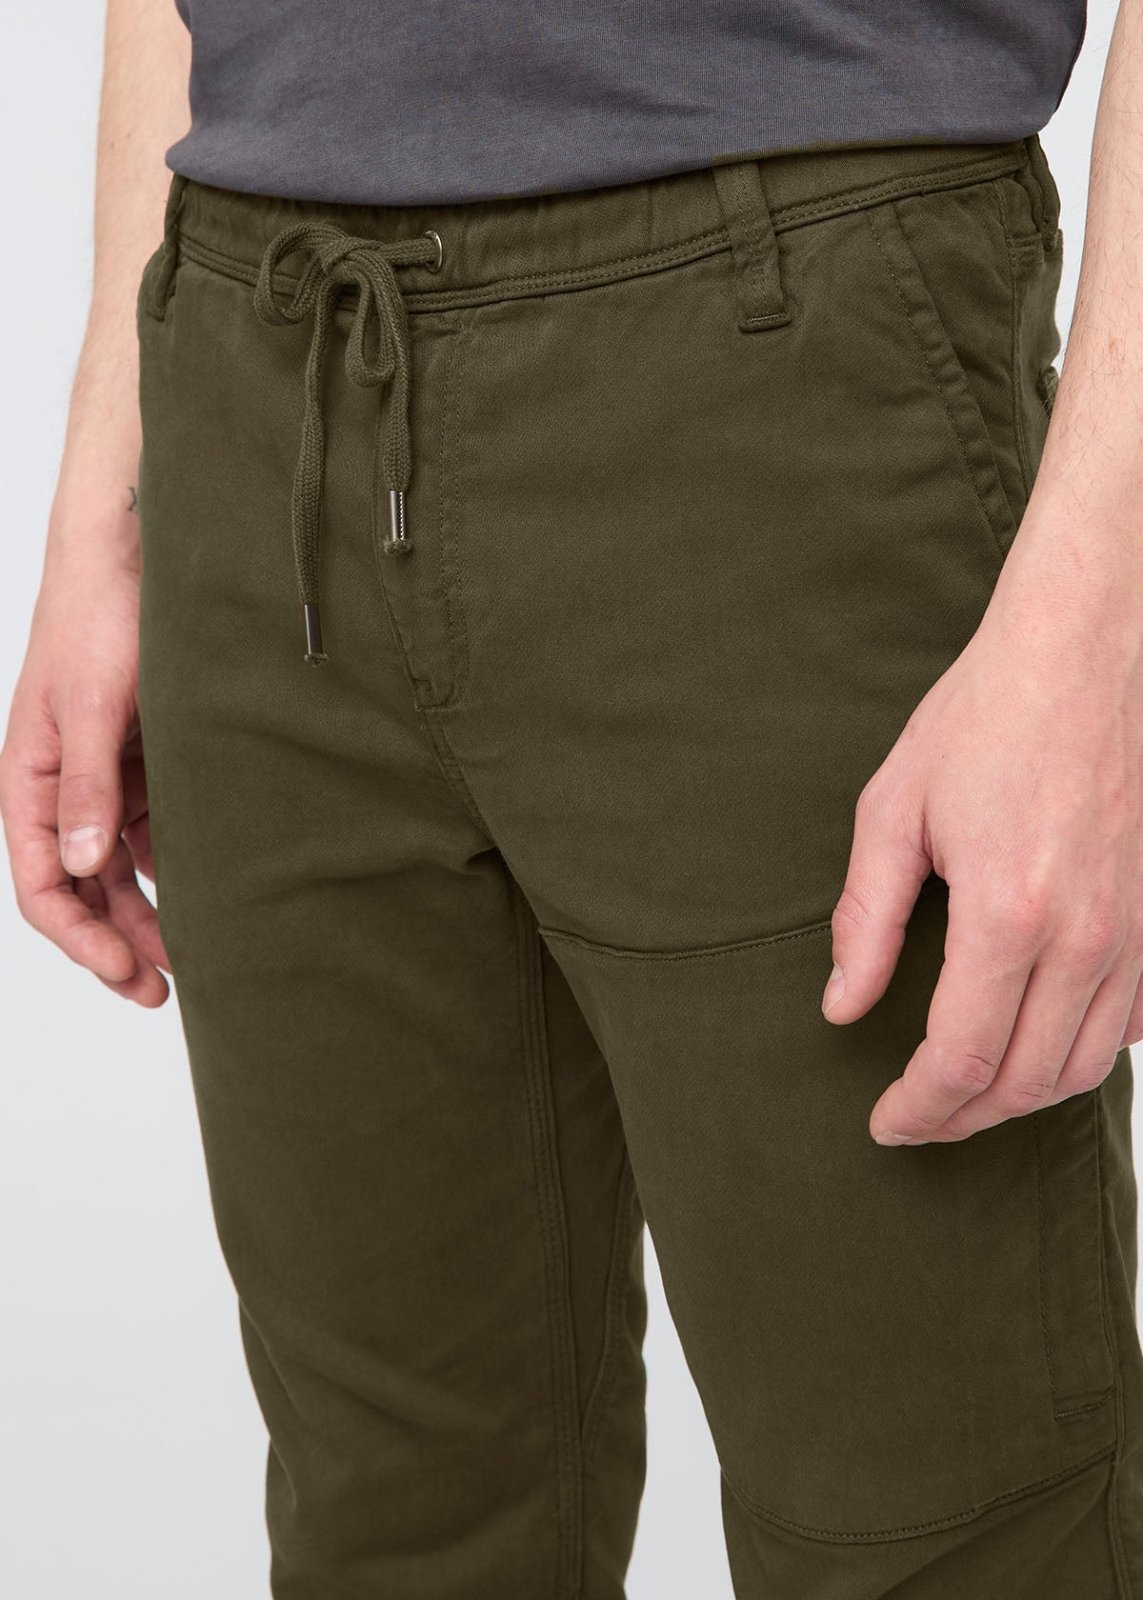 mens army green athletic jogger front waistband and gusset